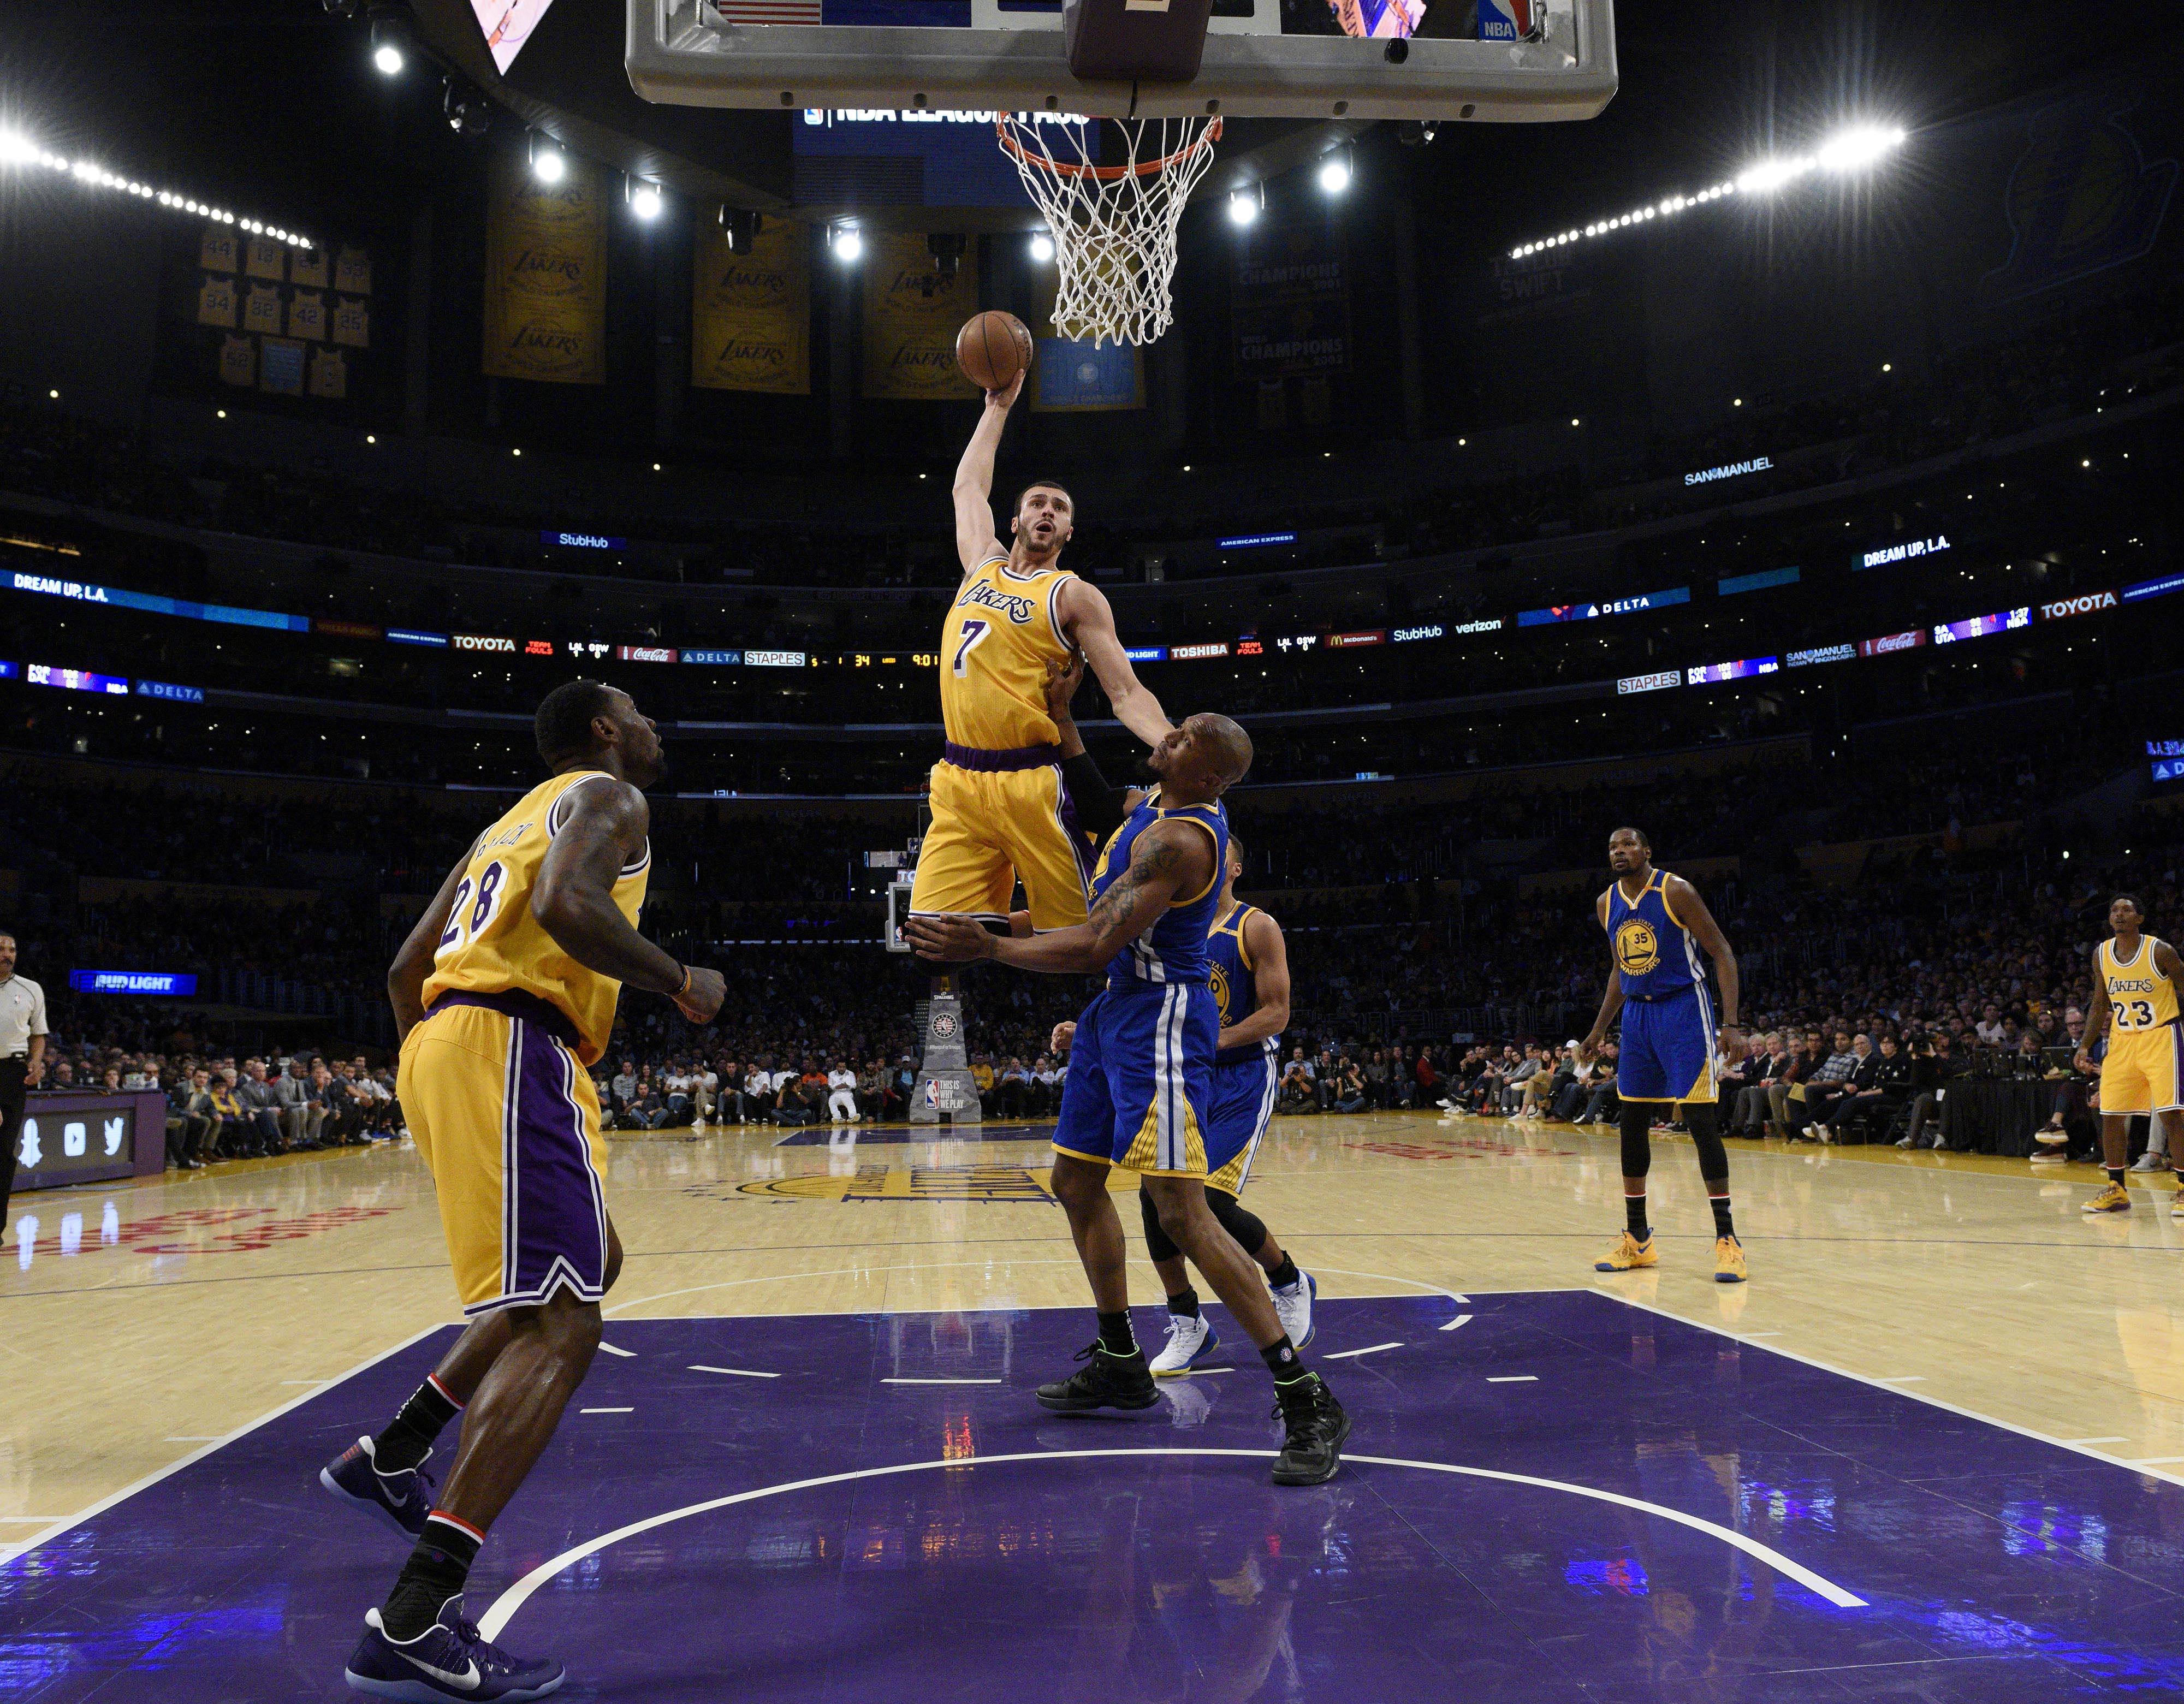 3 breathtaking photos of Larry Nance Jr.'s incredible dunk over David